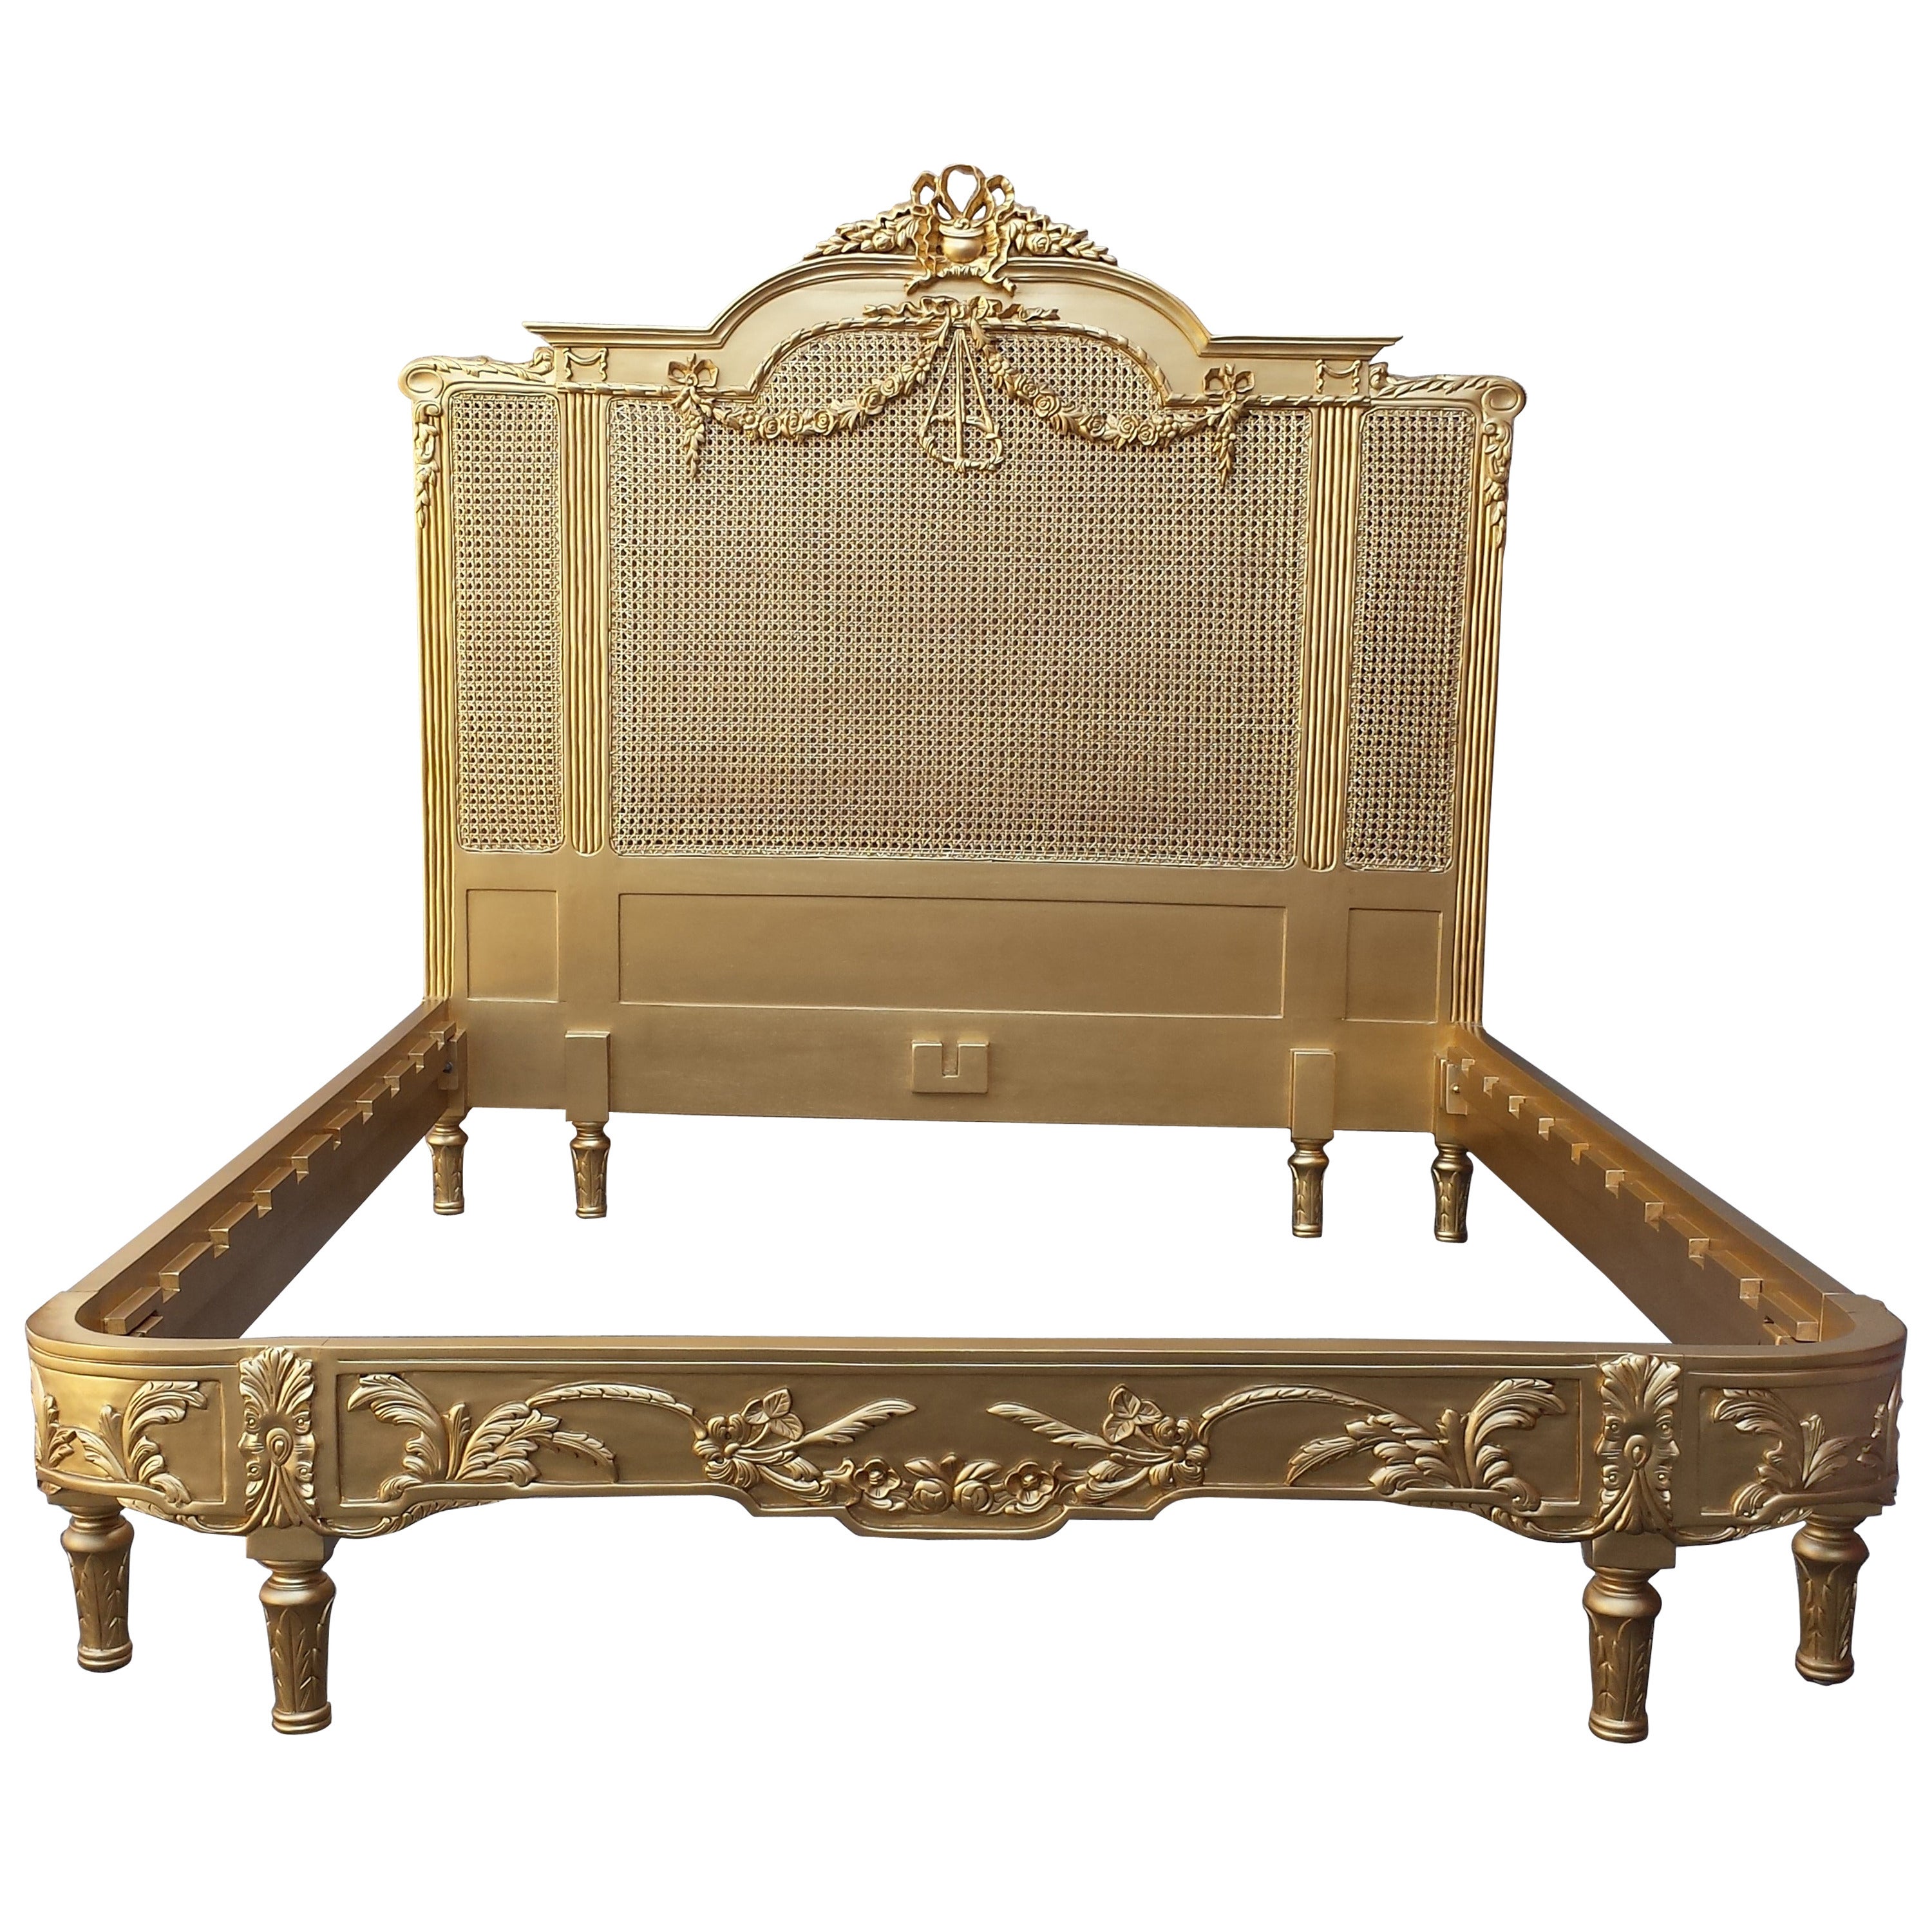 French Louis XV Style Queen Bed